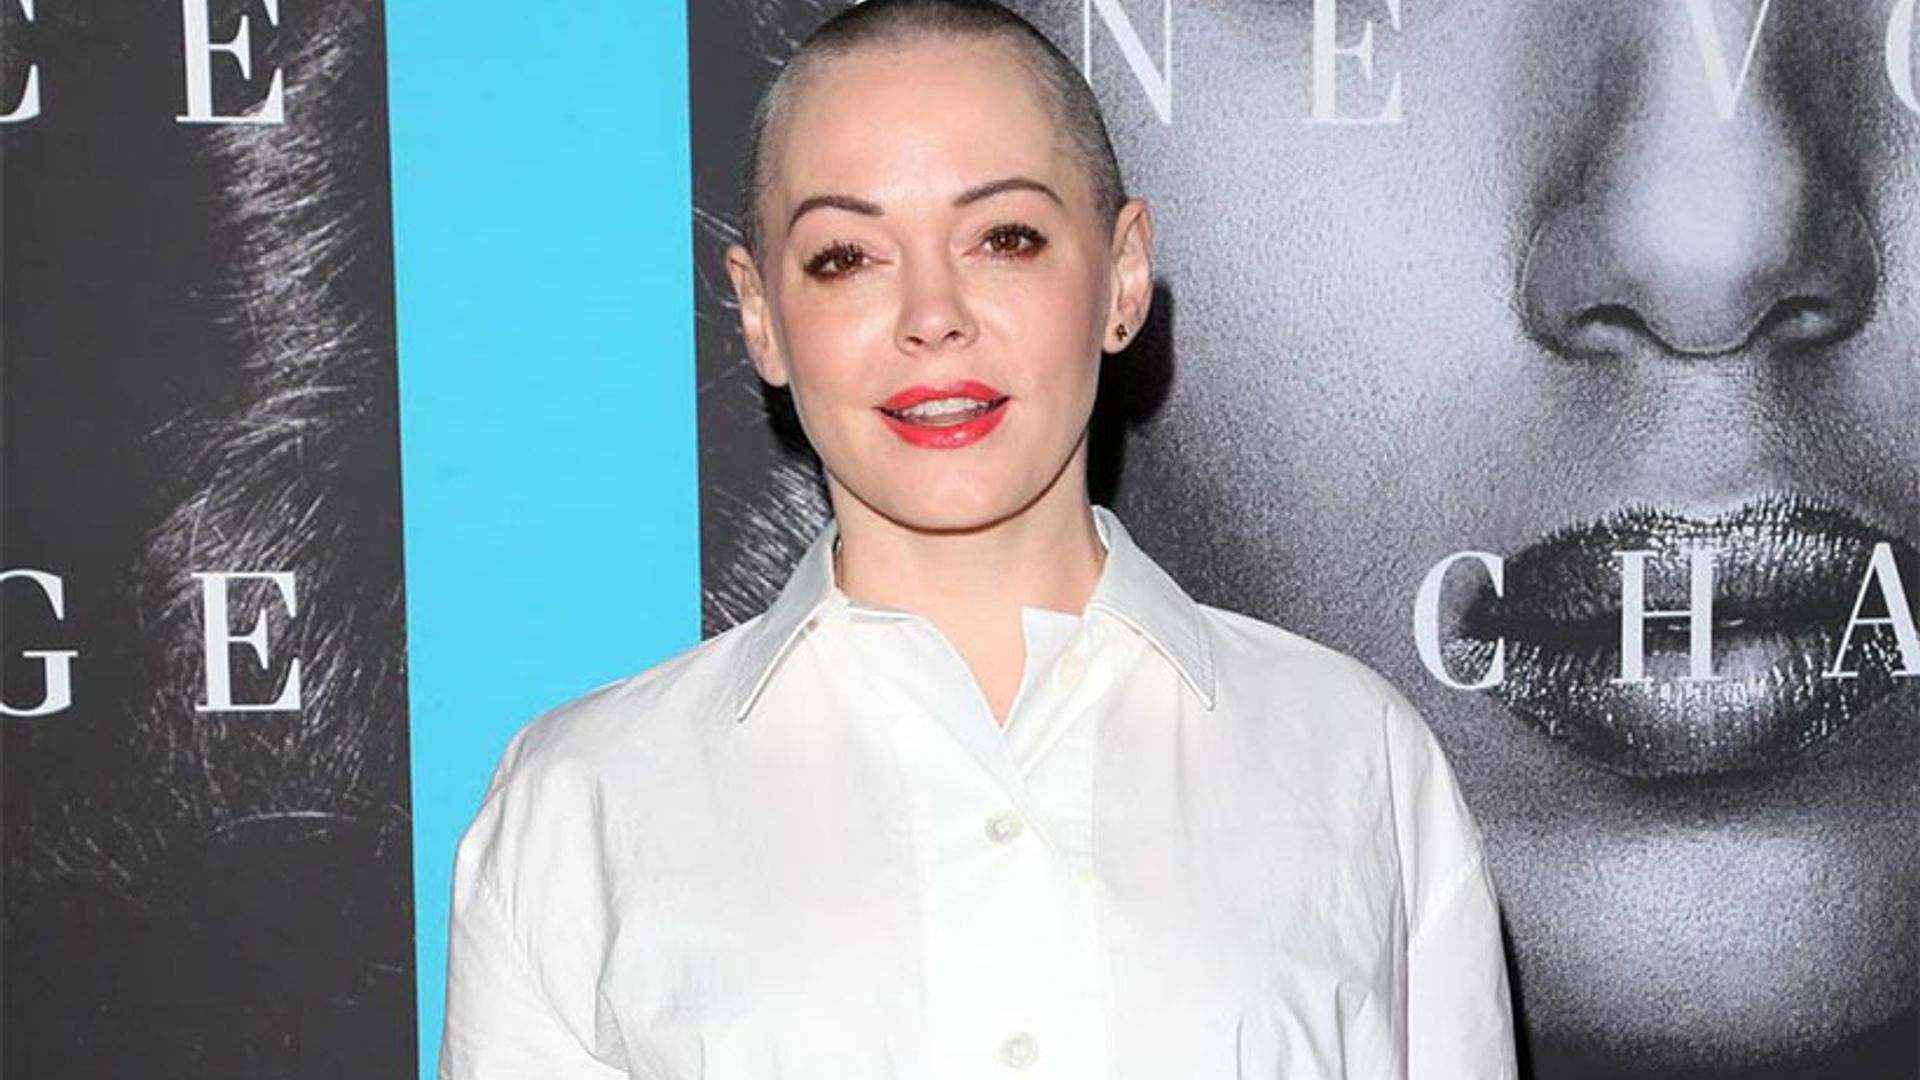 Rose McGowan hbo event